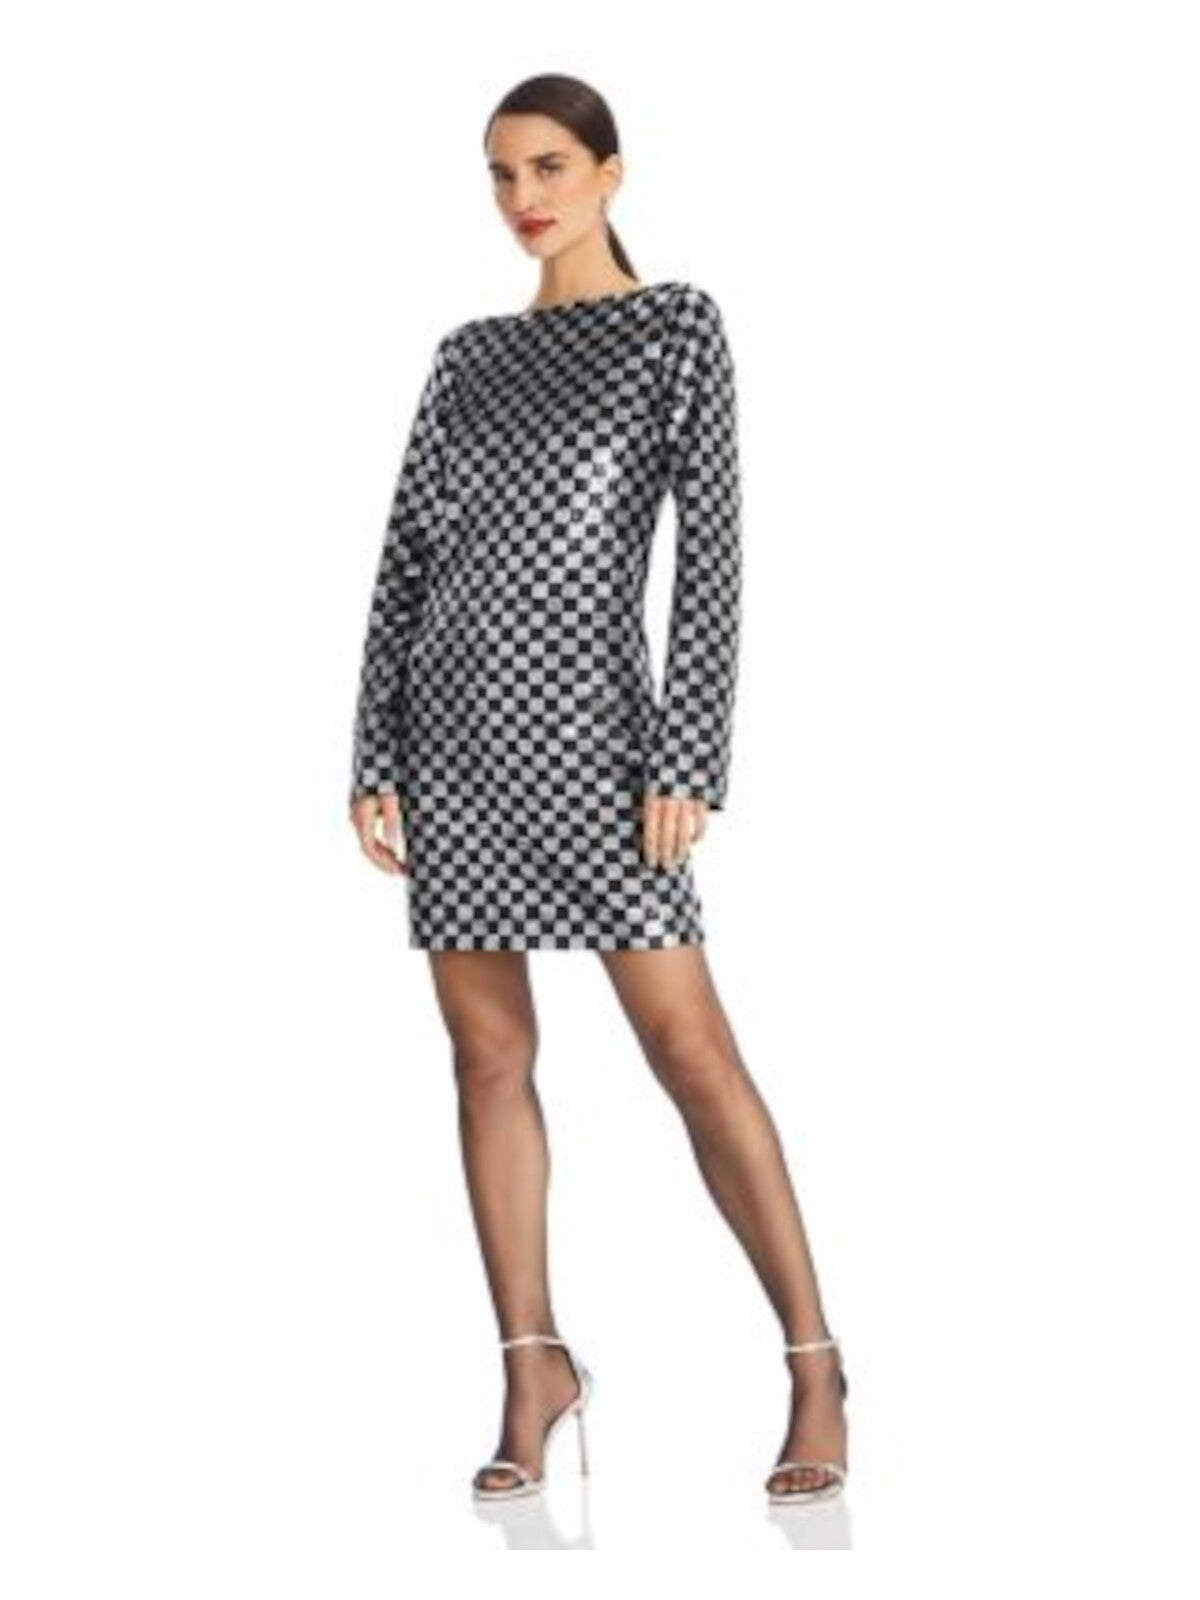 MICHAEL KORS Womens Black Sequined Zippered Lined Check Long Sleeve Boat Neck Above The Knee Cocktail Sheath Dress 2